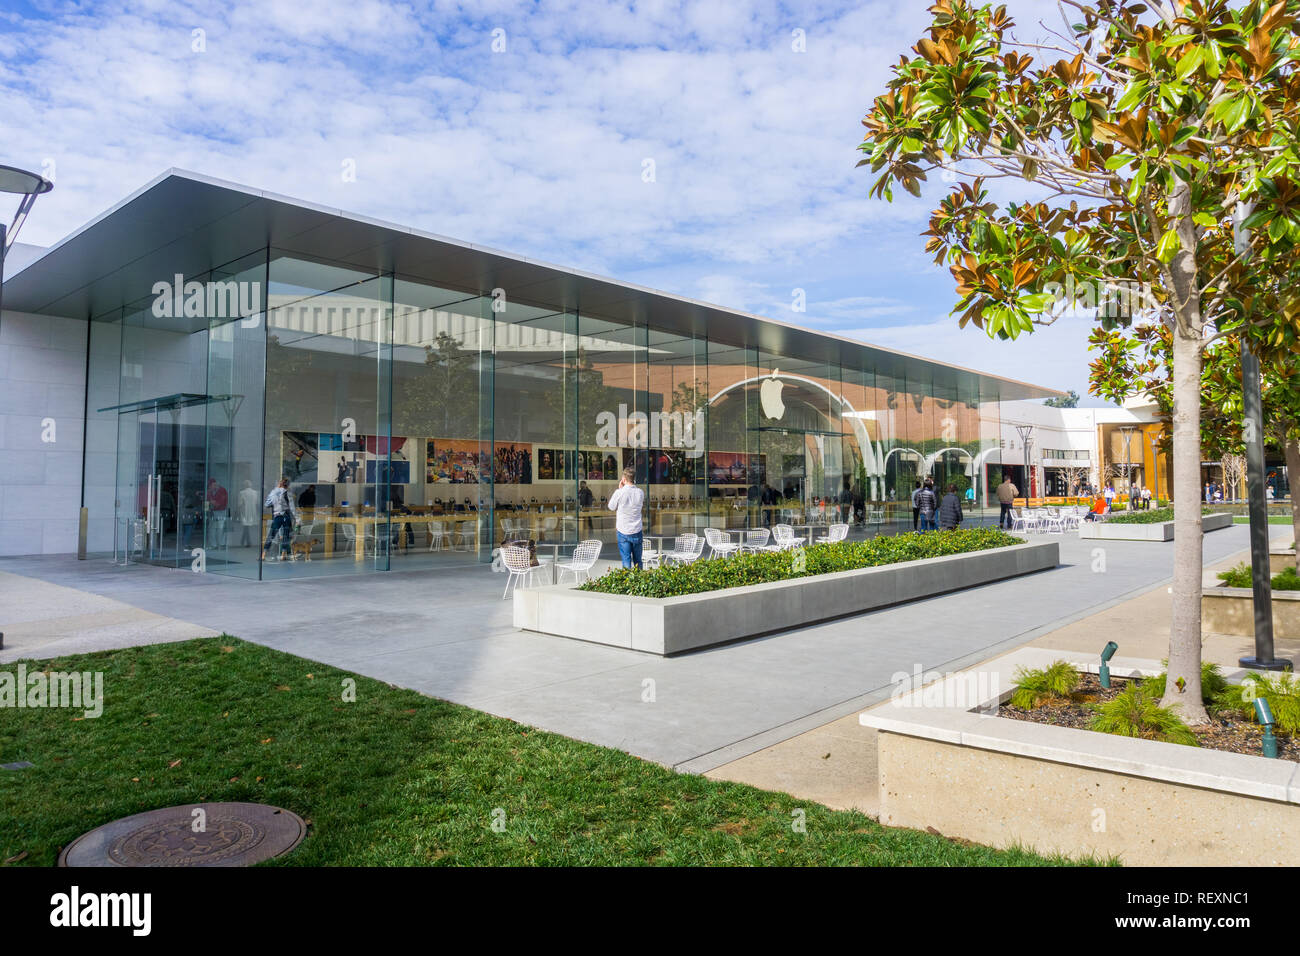 January 11, 2018 Palo Alto / CA / USA - Apple store located at the open air Stanford shopping center Stock Photo